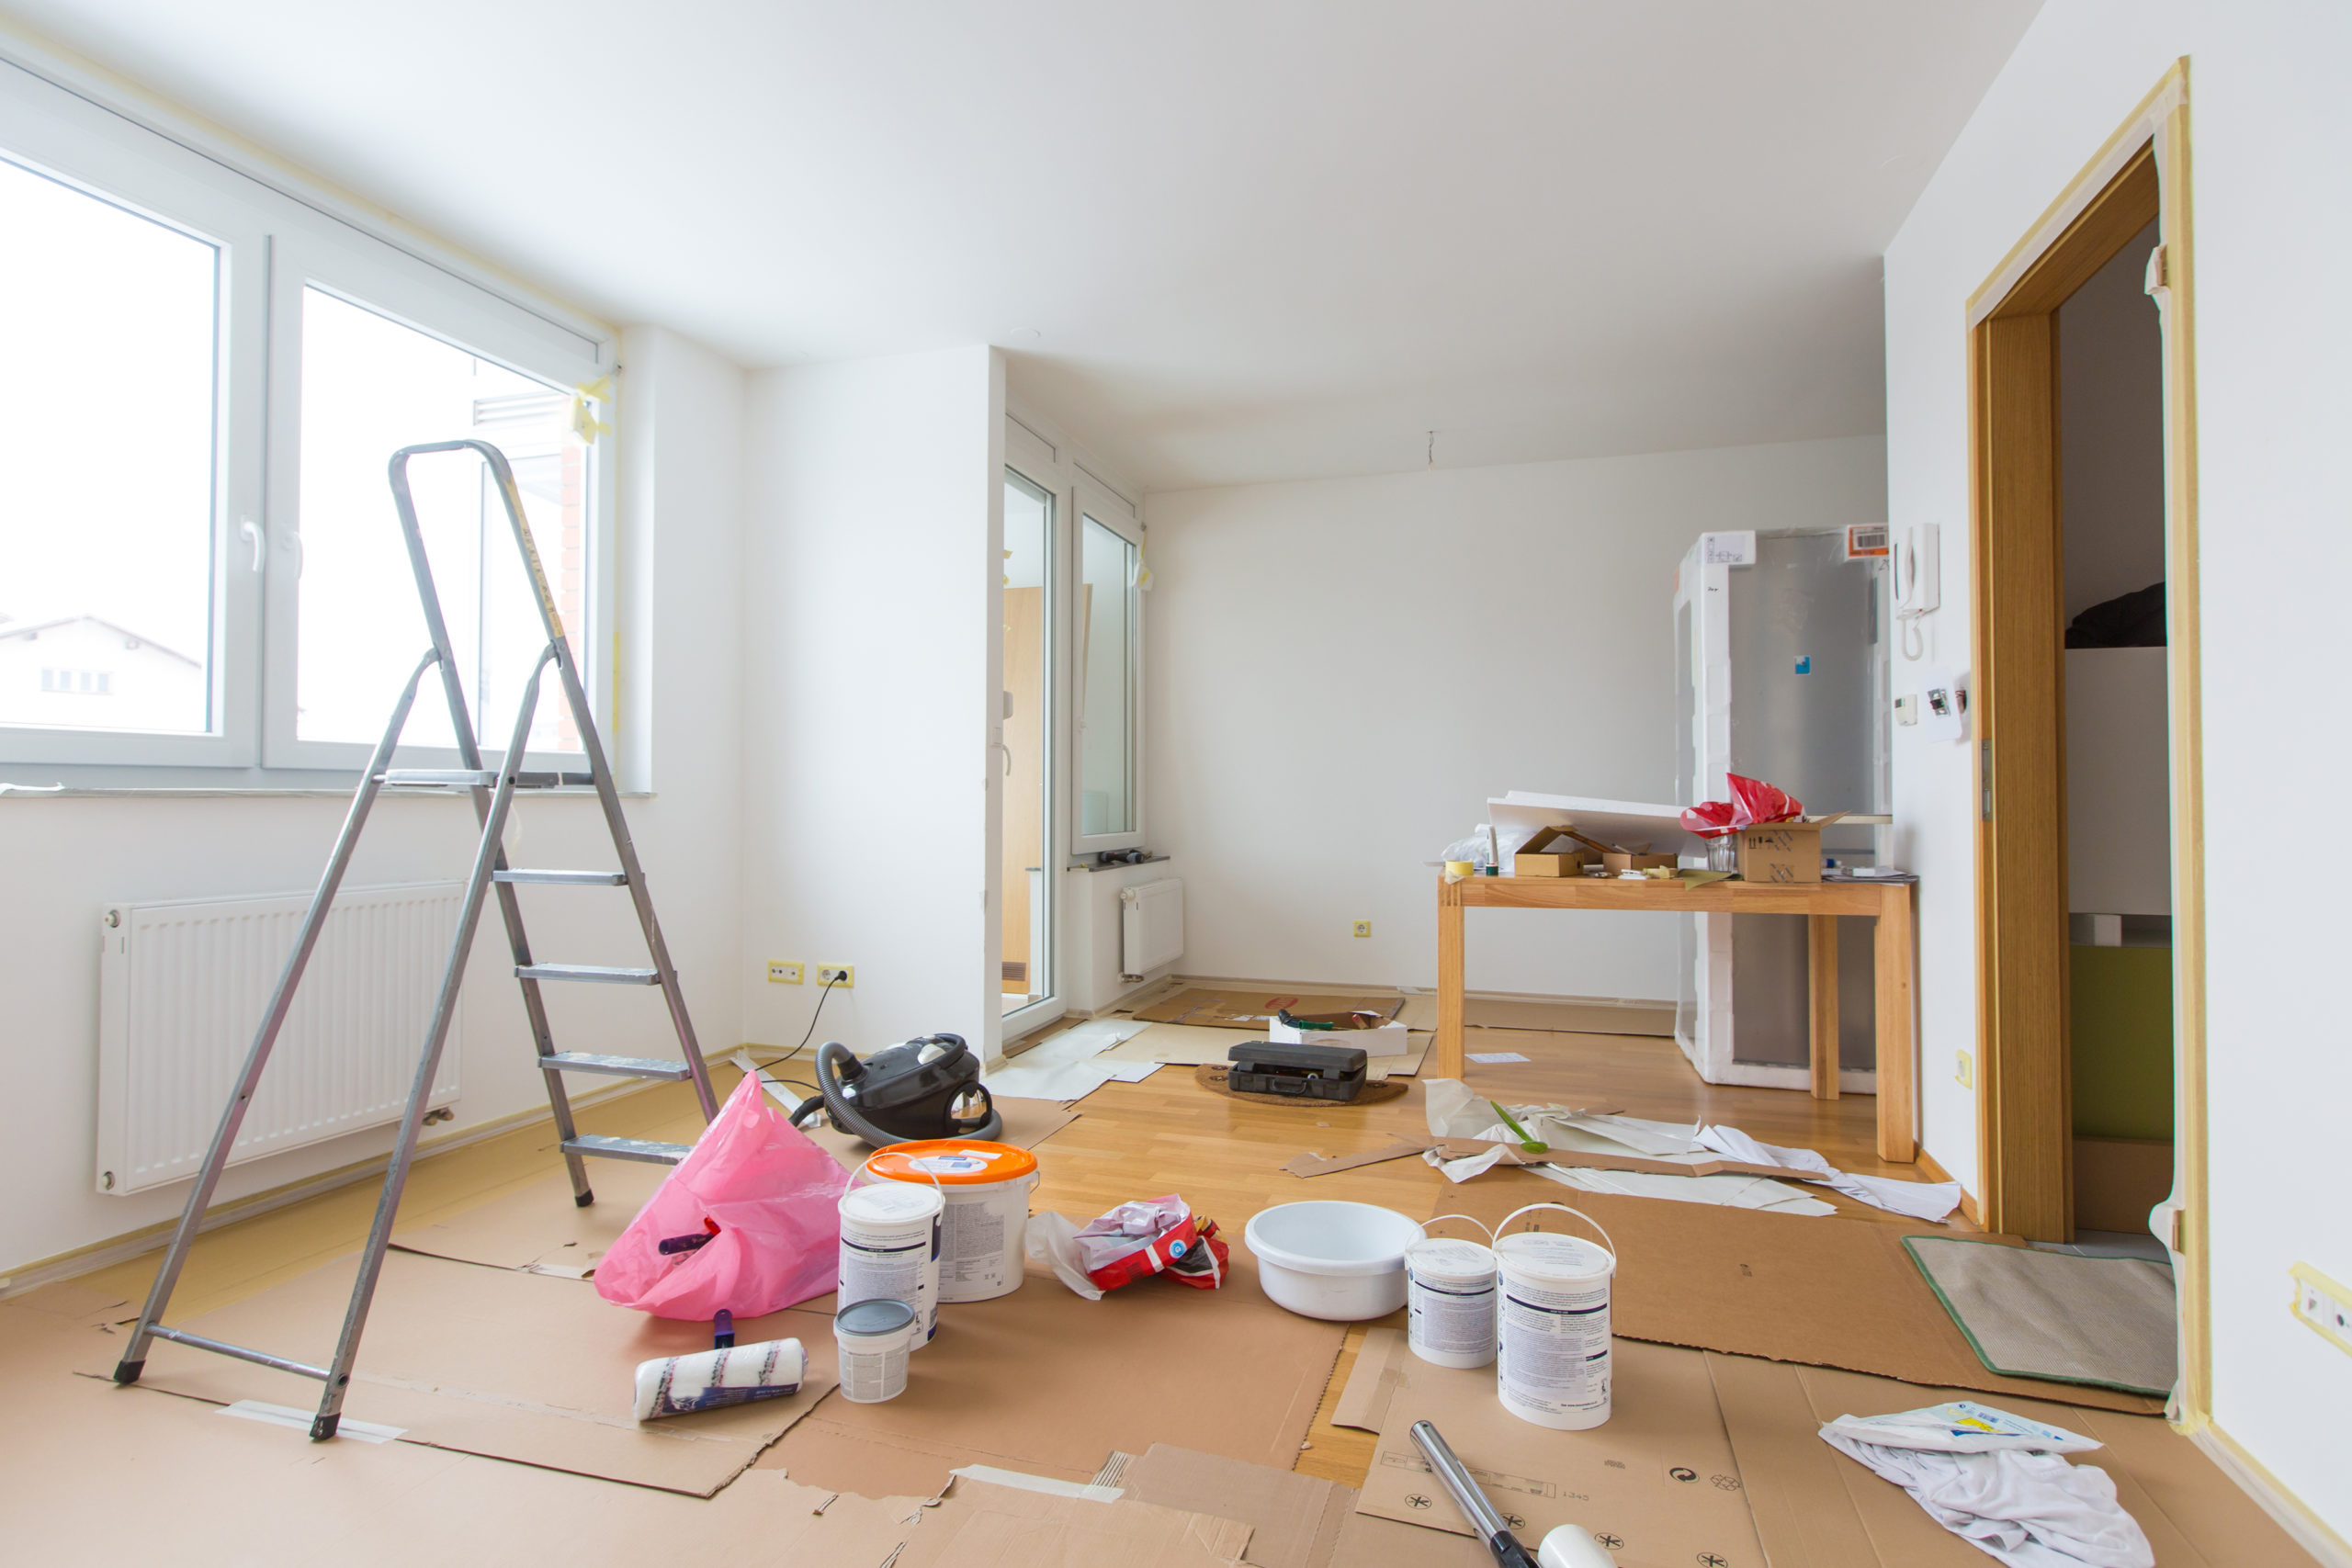 How To: Fixing and Flipping Homes